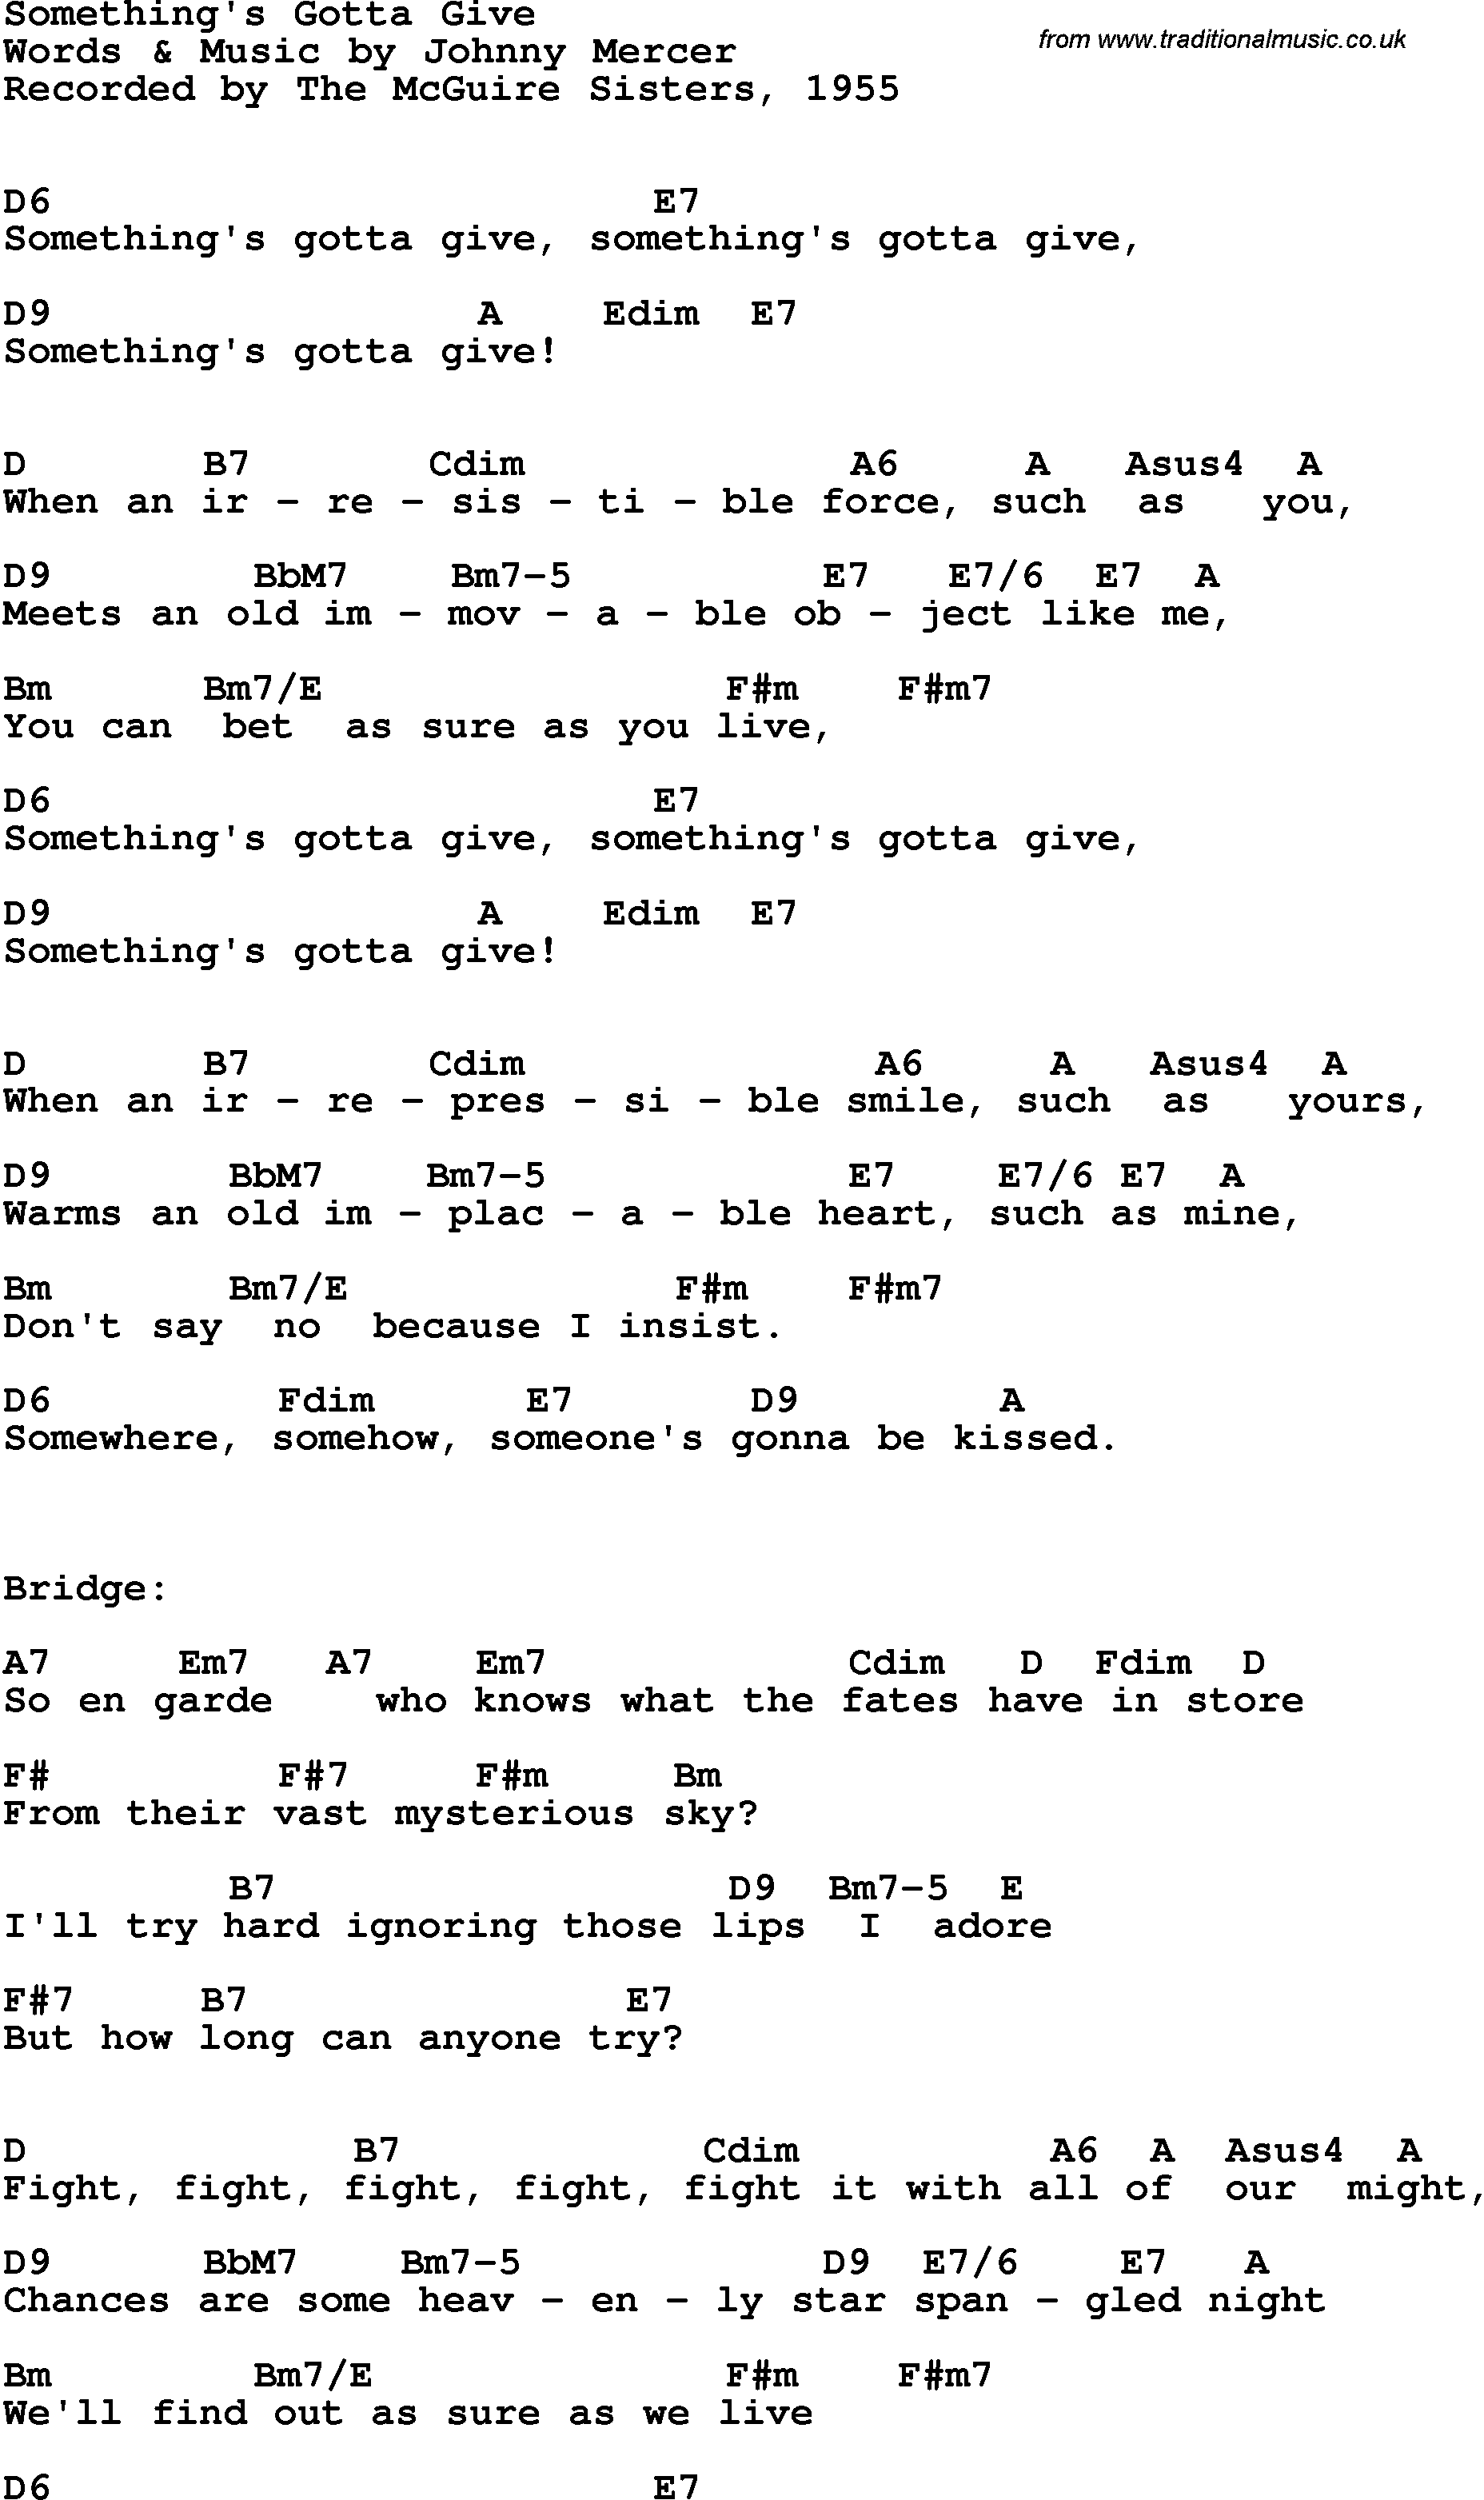 Song Lyrics with guitar chords for Something's Gotta Give - The Mcguire Sisters, 1955